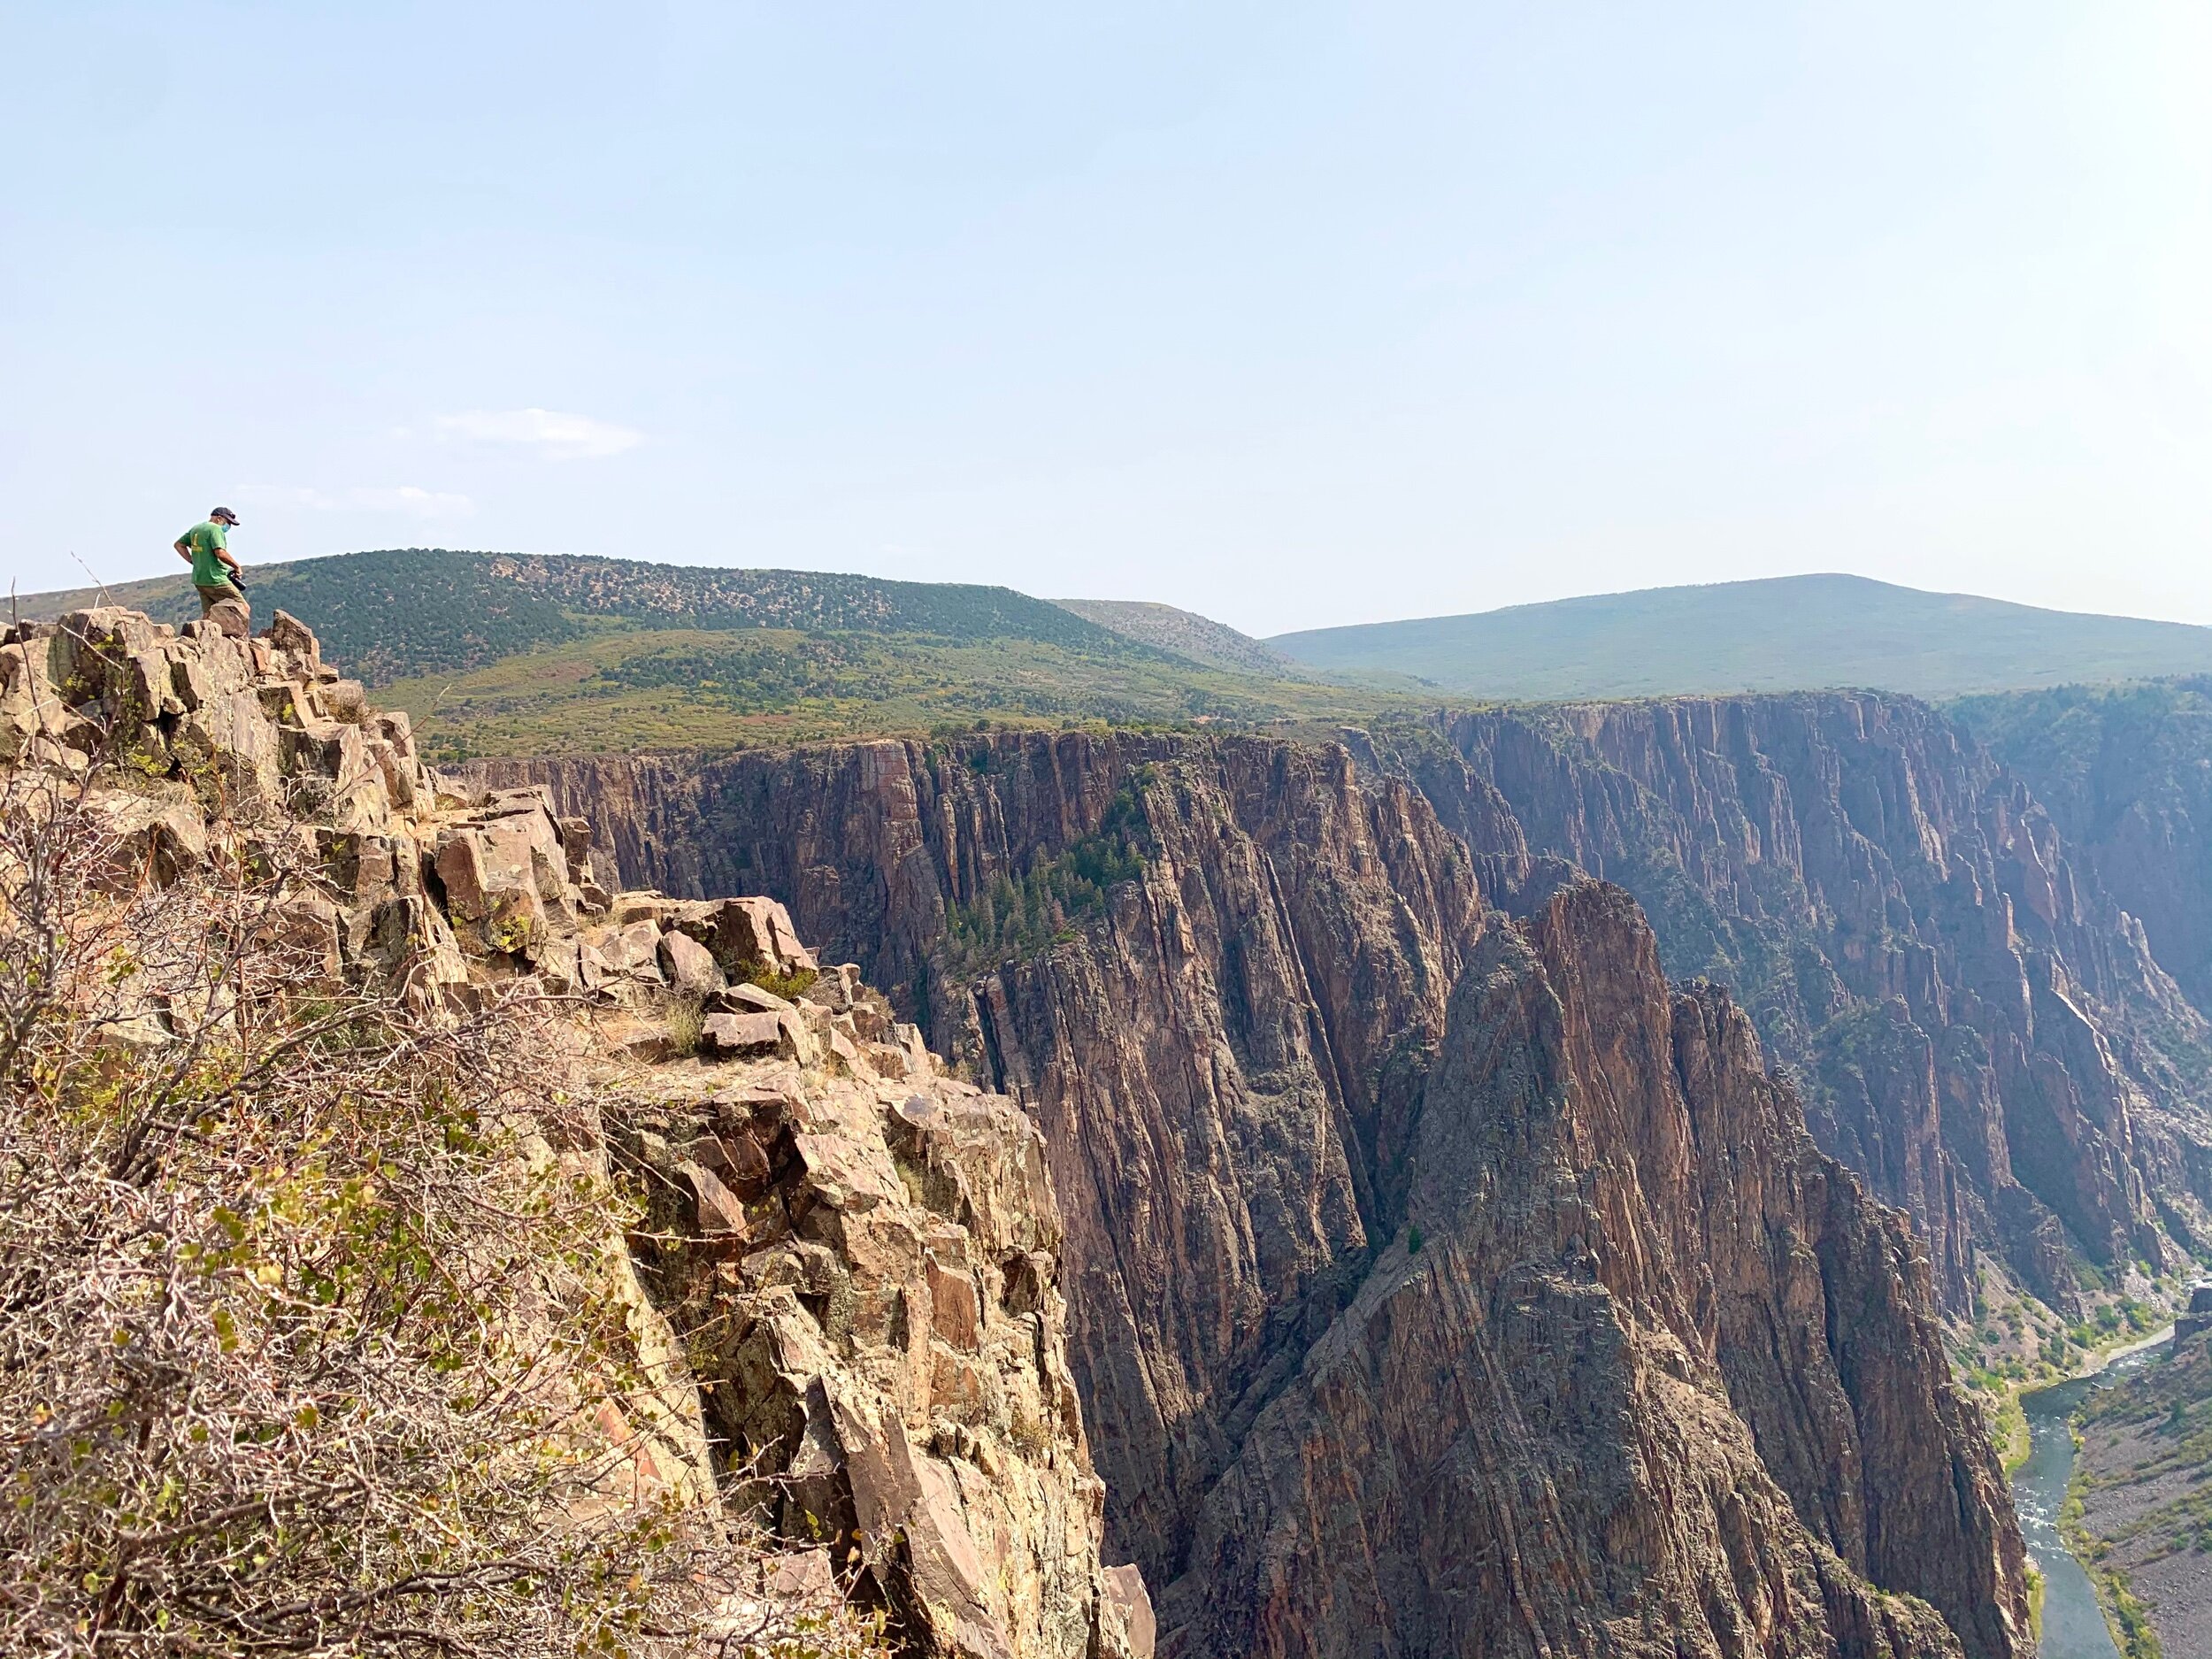   Black Canyon of the Gunnison National Park  in western Colorado boasts some of the steepest cliffs, oldest rock, and most jagged spires in North America. The  Gunnison River , along with the forces of weathering, has been sculpting this wilderness 